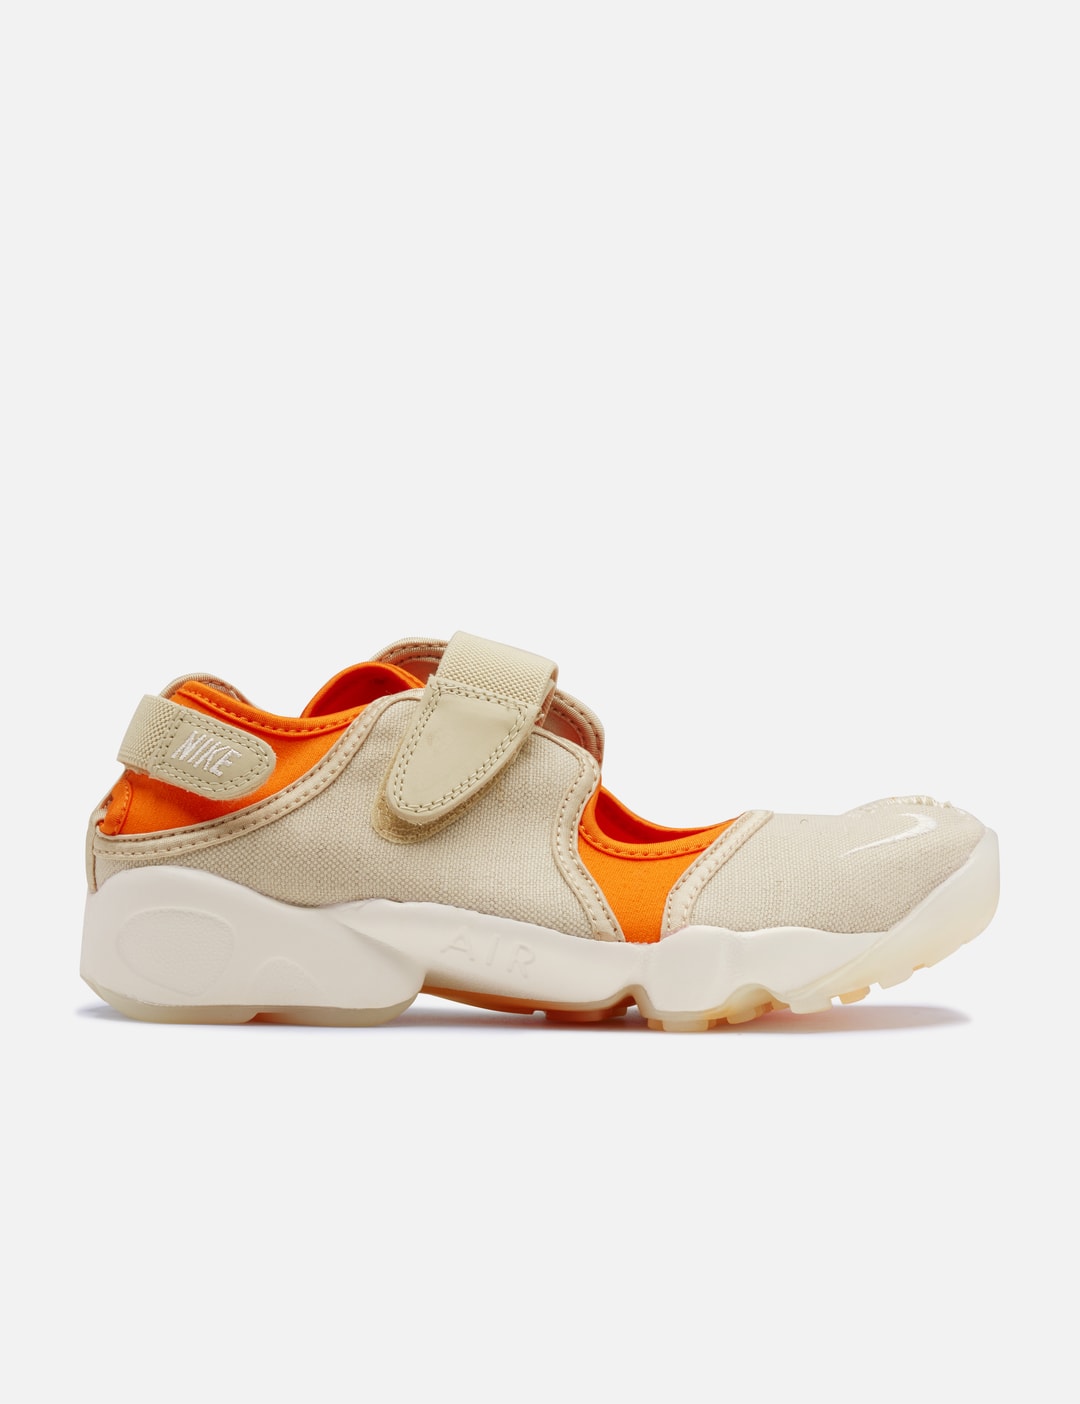 Punto de exclamación frase Combatiente Nike - Nike Air Rift | HBX - Globally Curated Fashion and Lifestyle by  Hypebeast